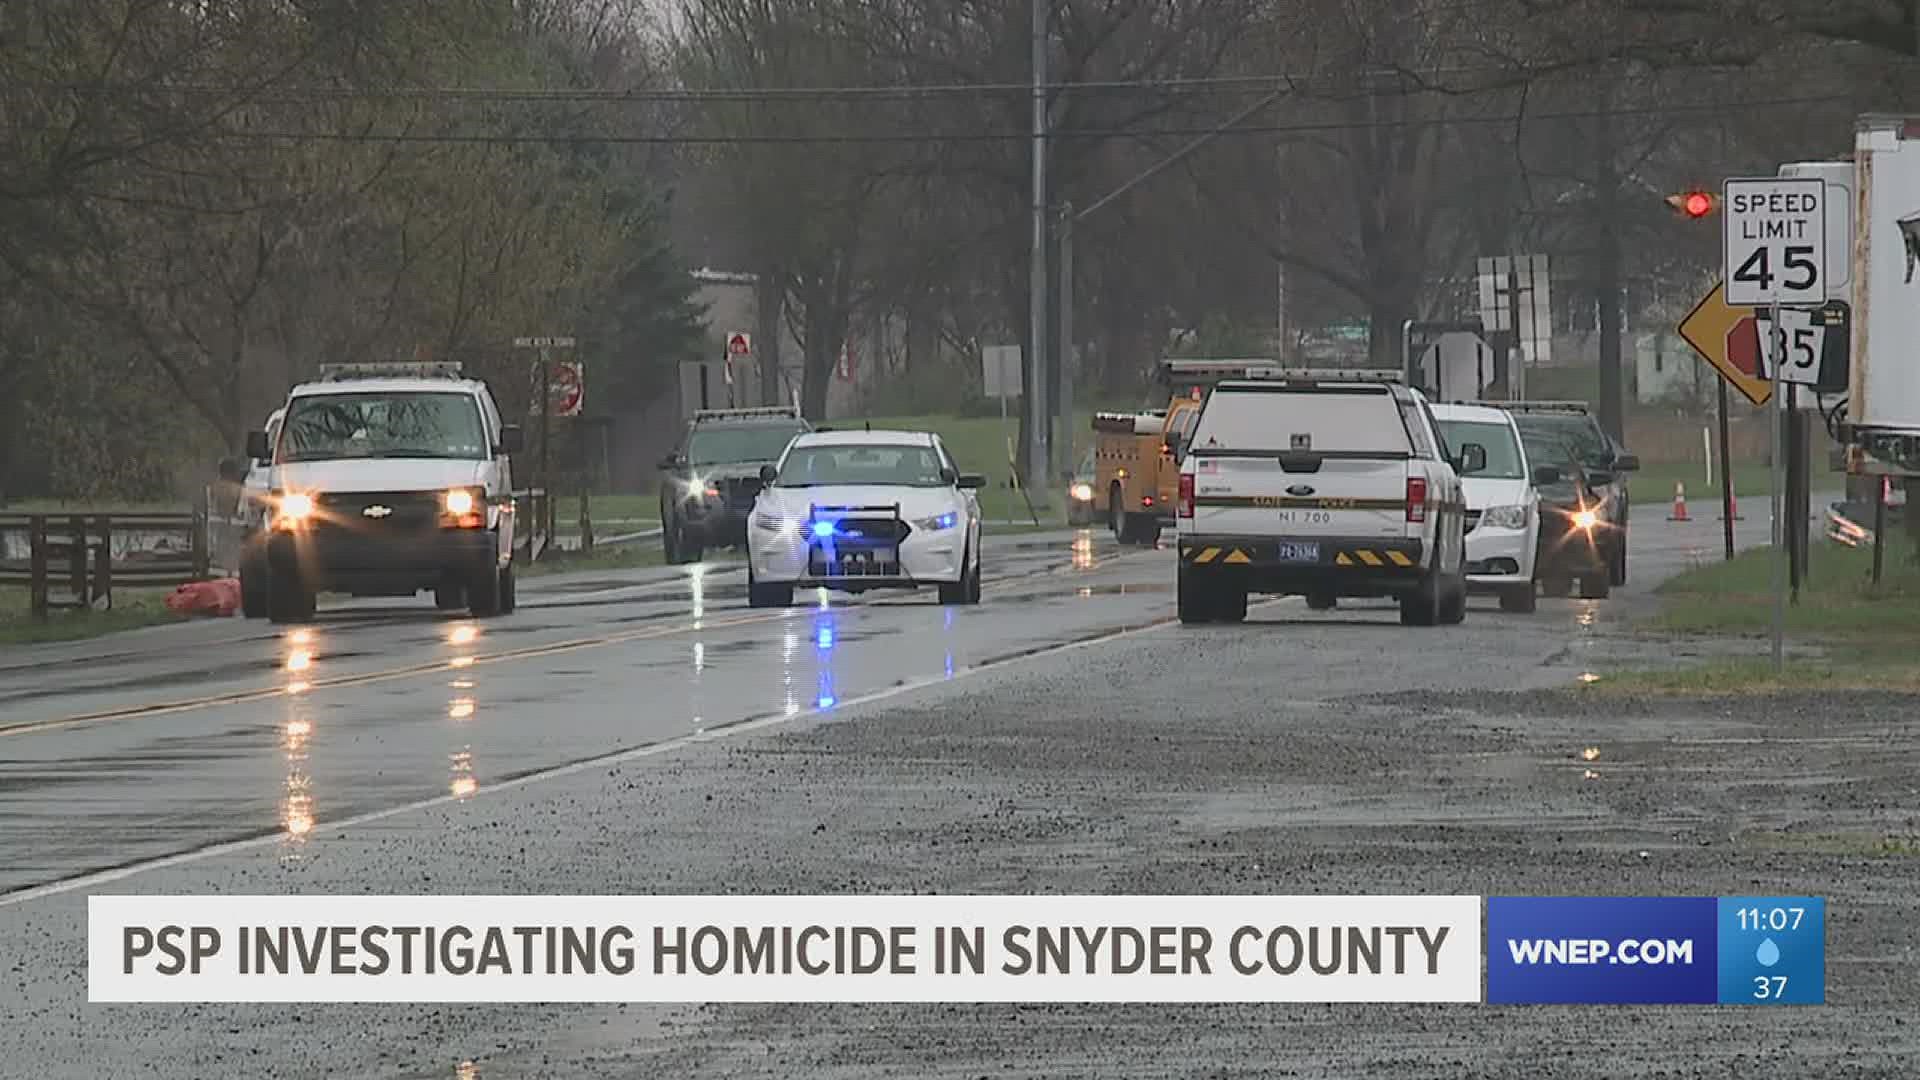 State Police confirmed the reported shooting in Snyder County Monday afternoon was a homicide.